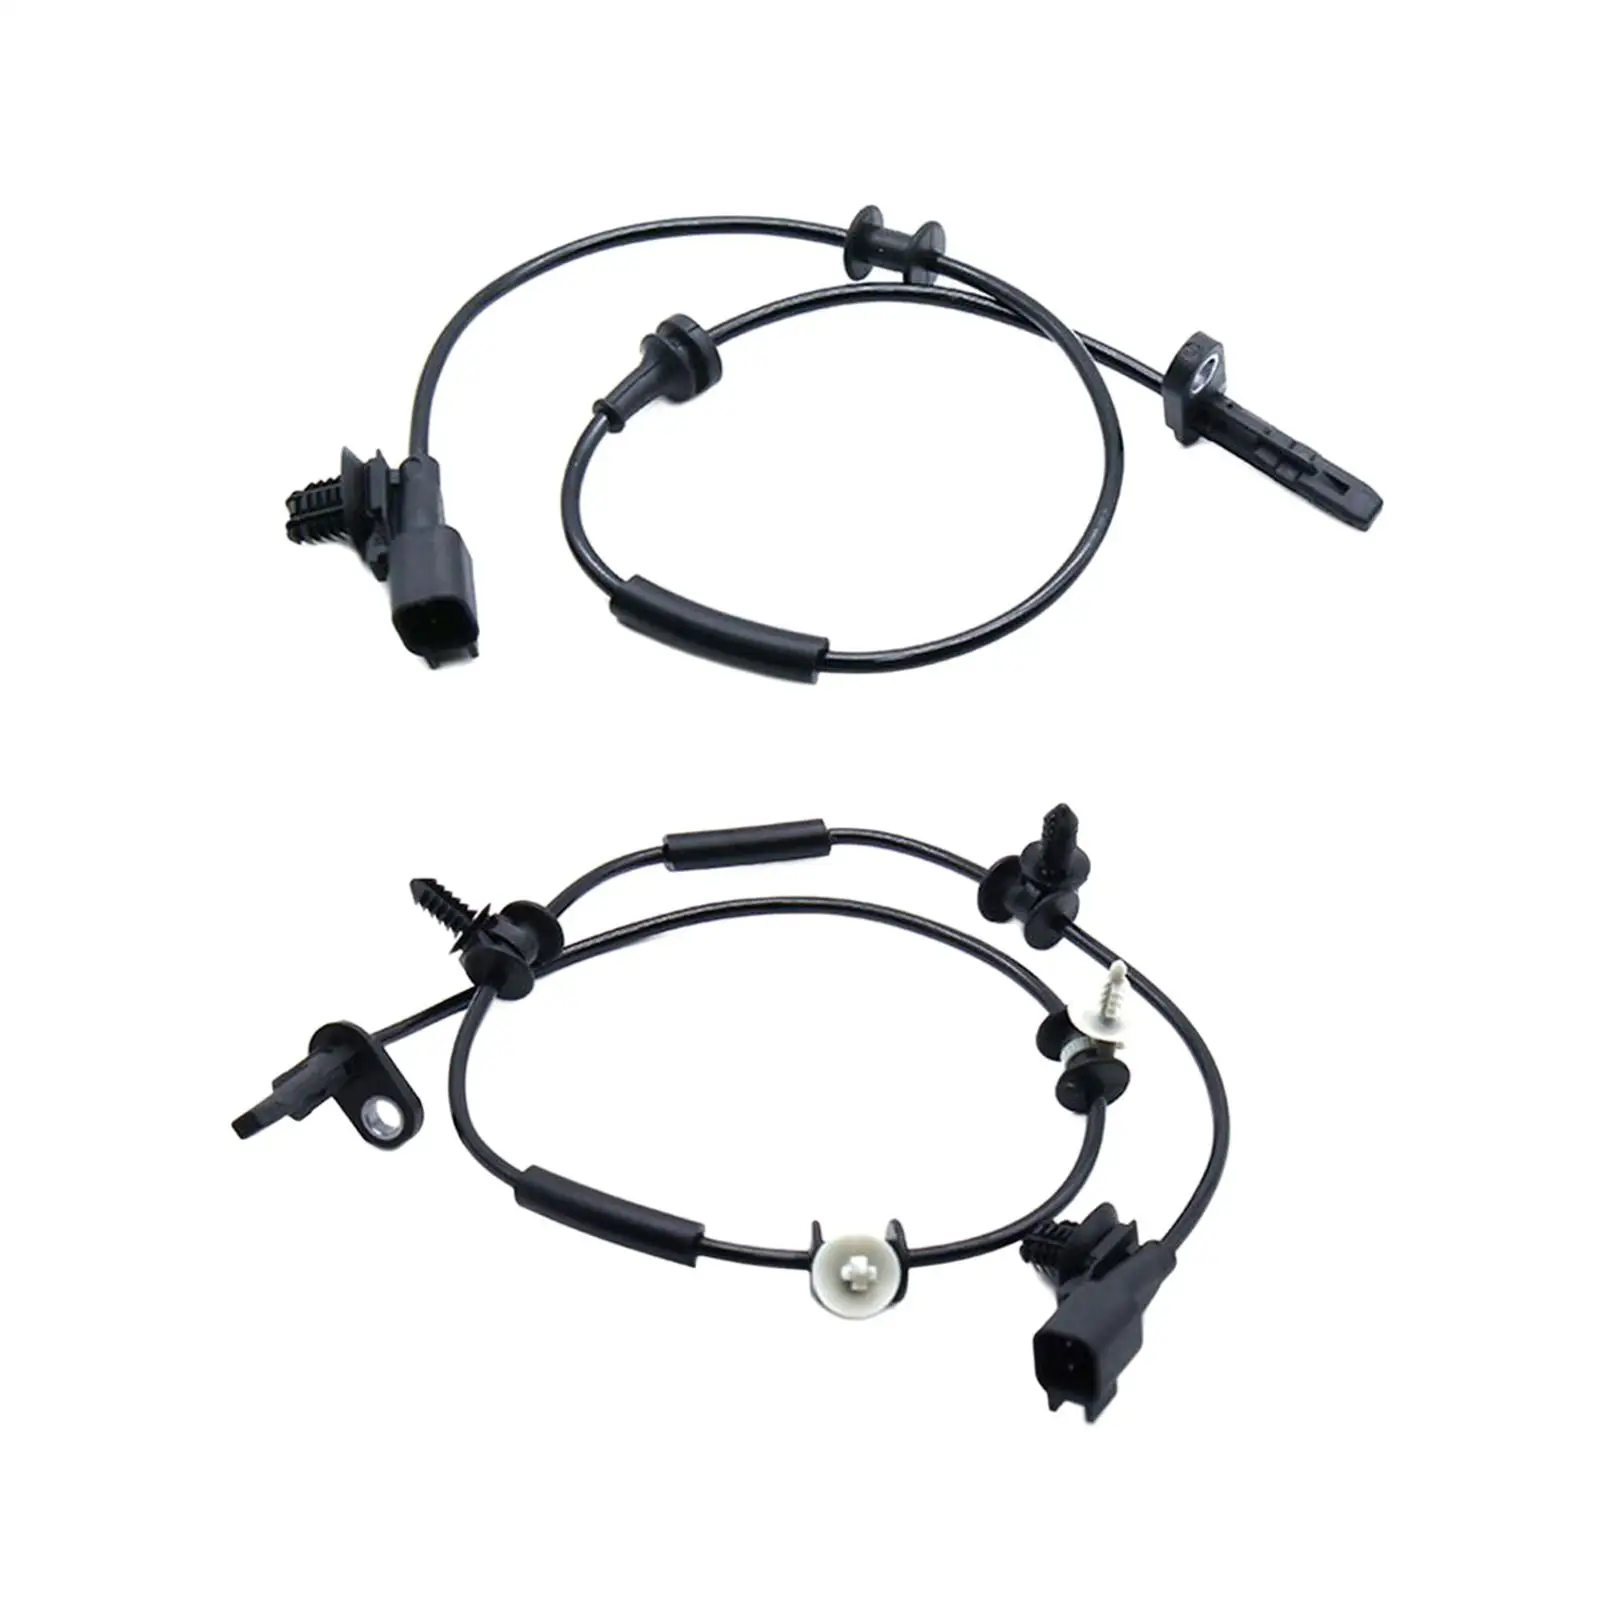 ABS Wheel Speed Sensor Auto Direct Replaces Safe Driving Easy to Install Anti Lock Brake Sensor Parts for Tesla Model 3 Y